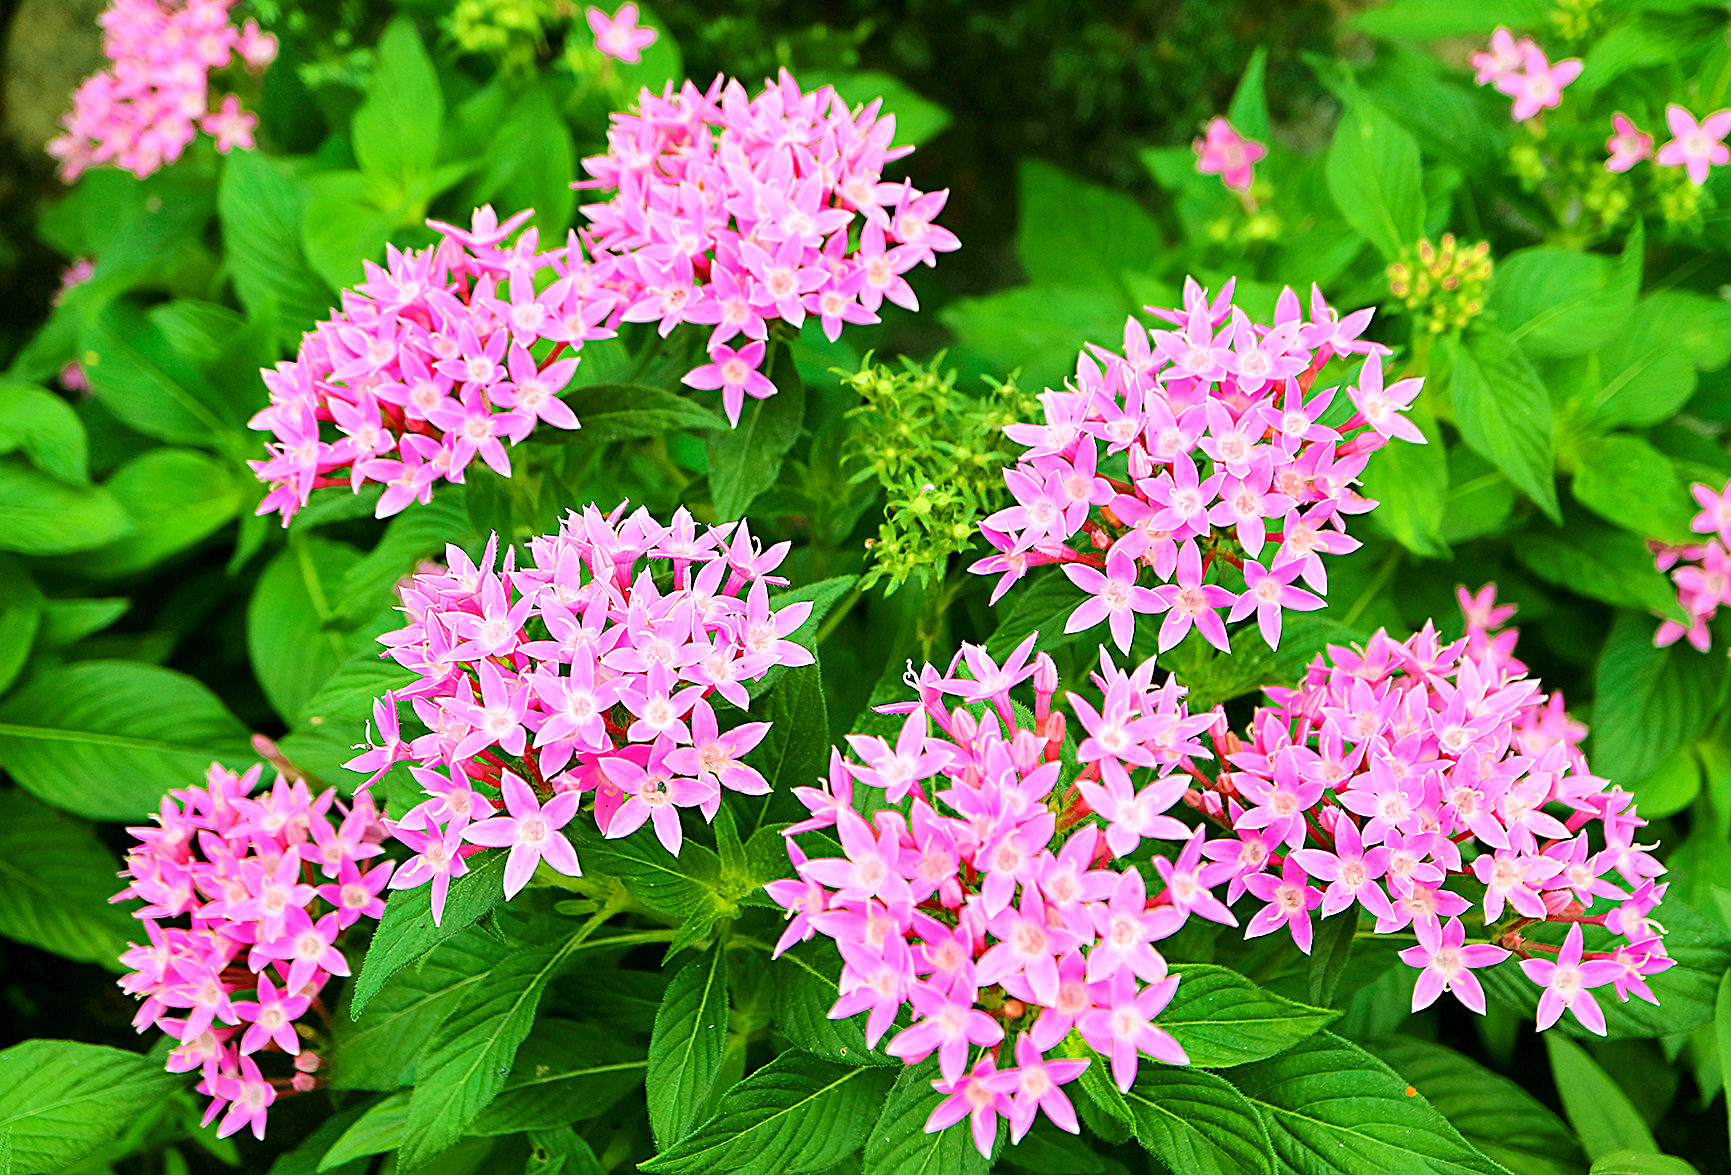 Bunches of Vibrant Pink Egyptian Starcluster or Pentas Flowers Blooming among Green Foliage